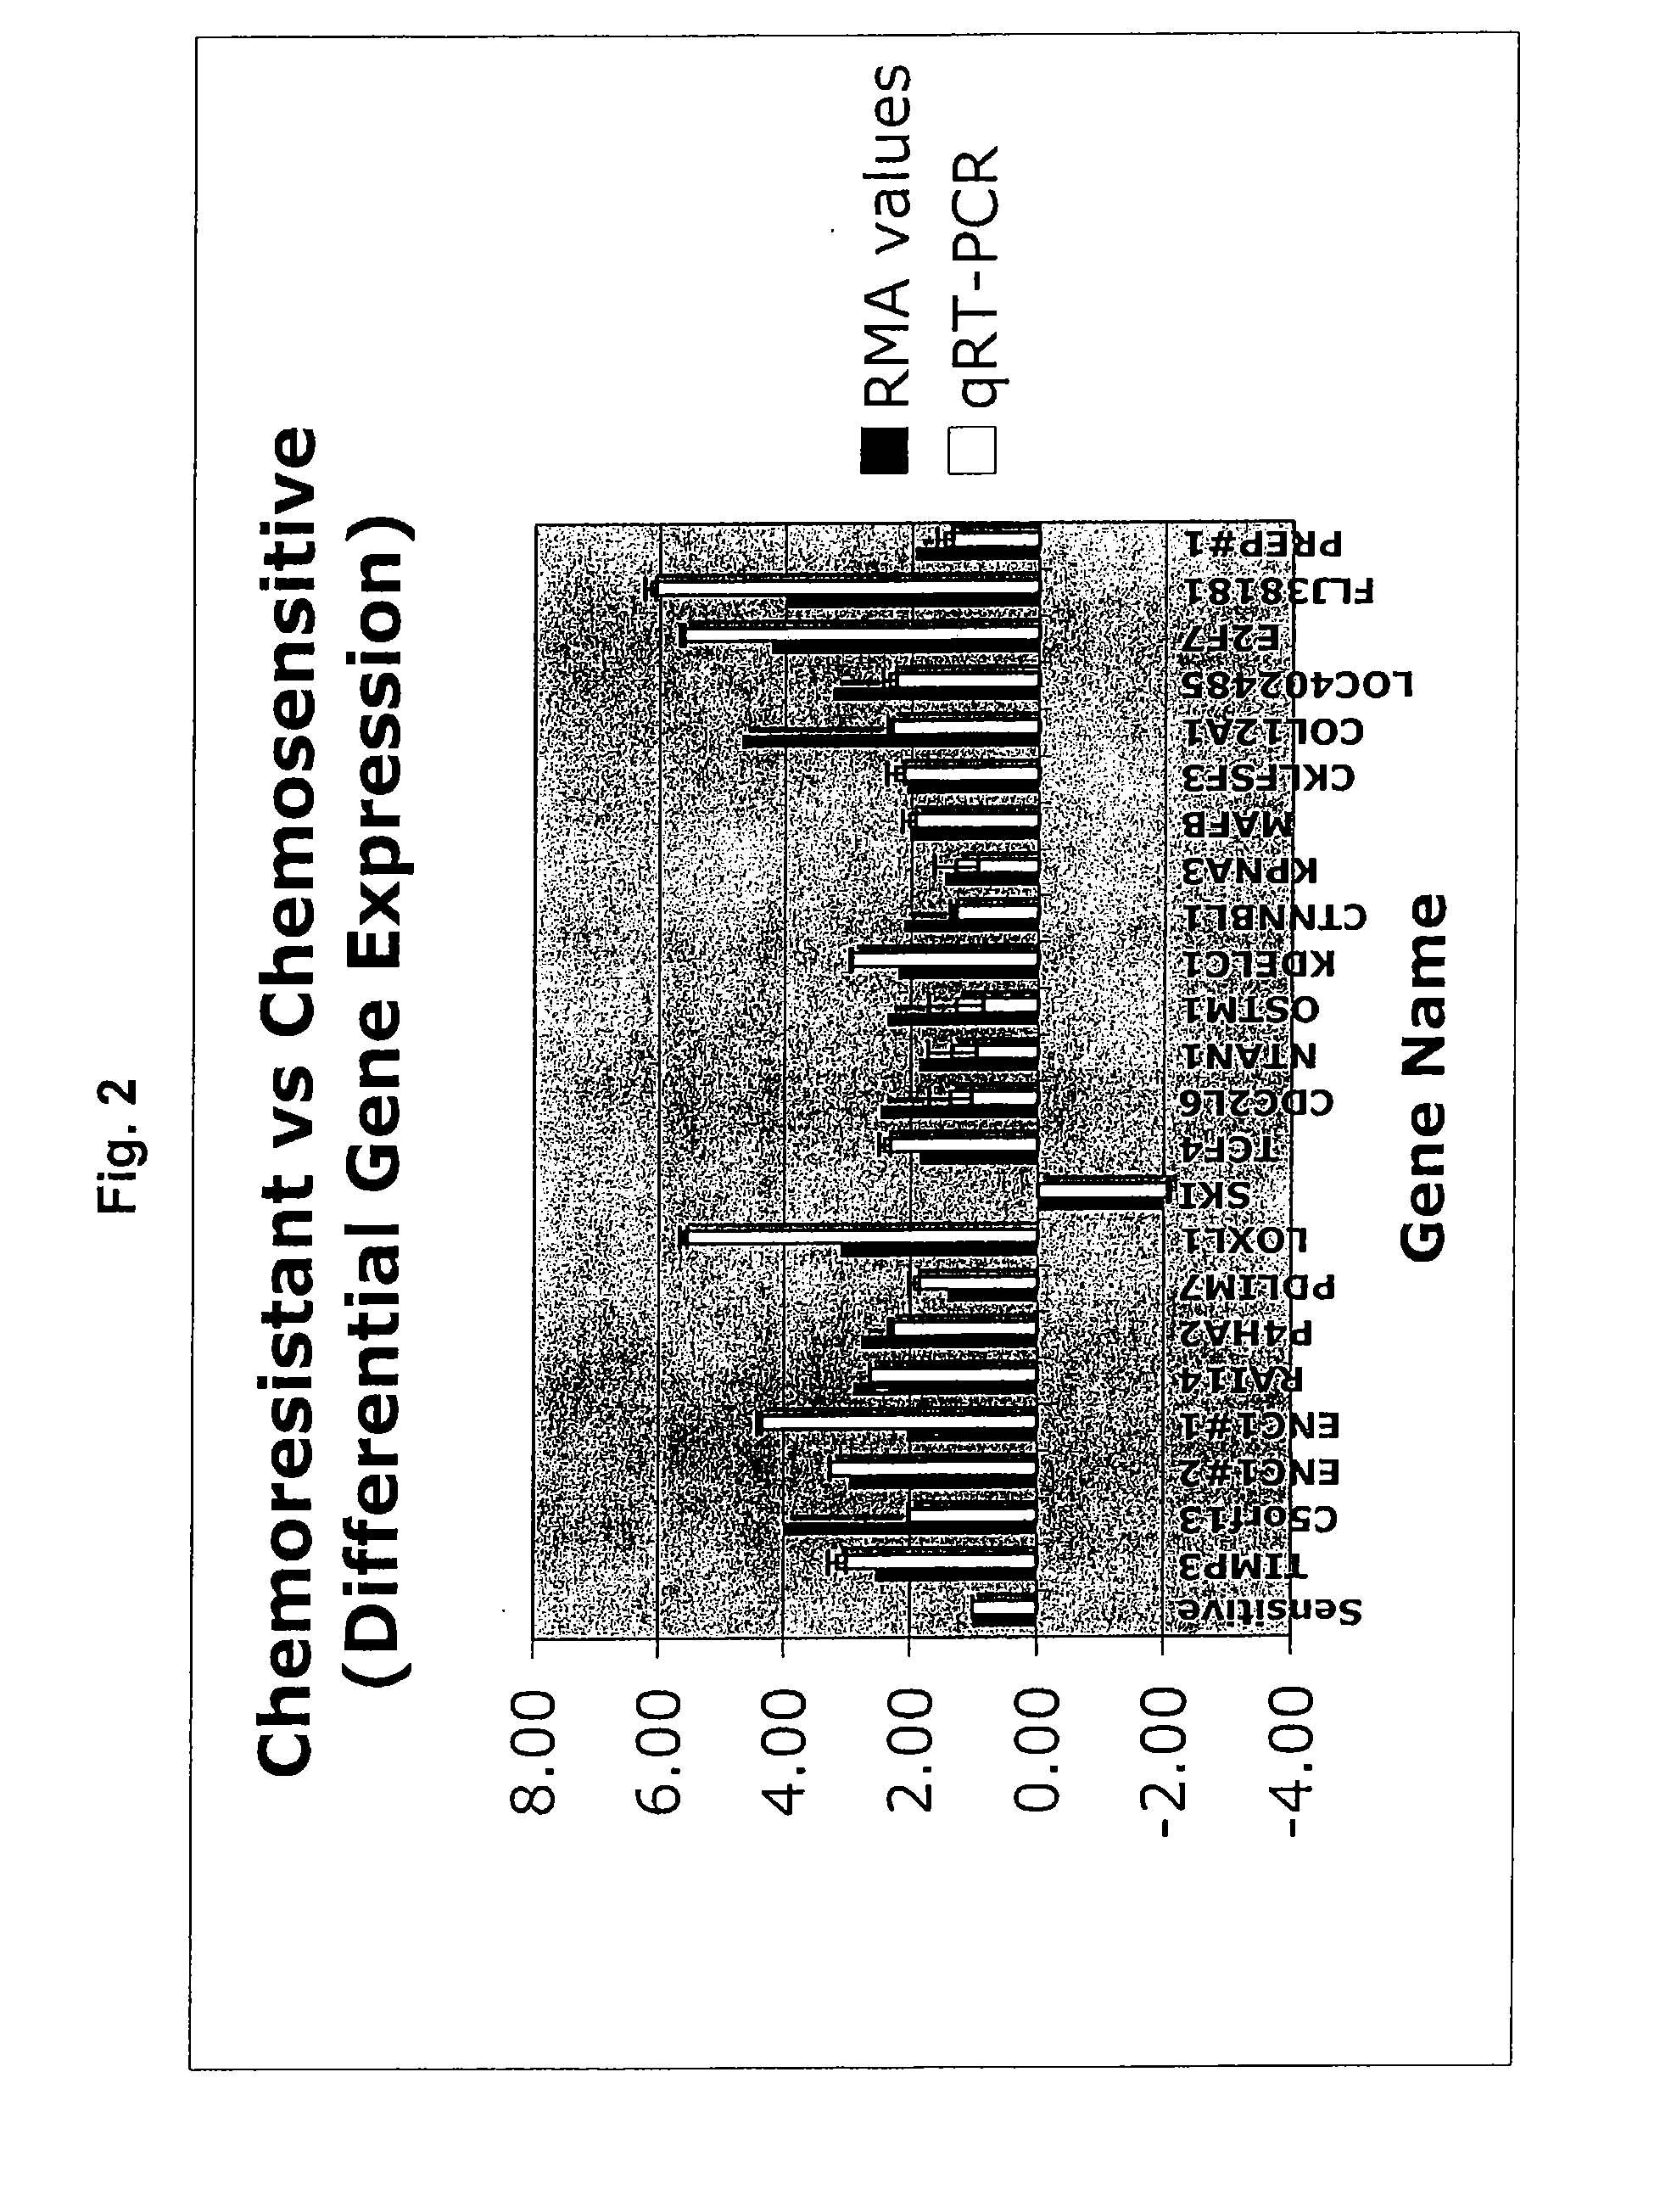 Gene expression profile that predicts ovarian cancer subject response to chemotherapy